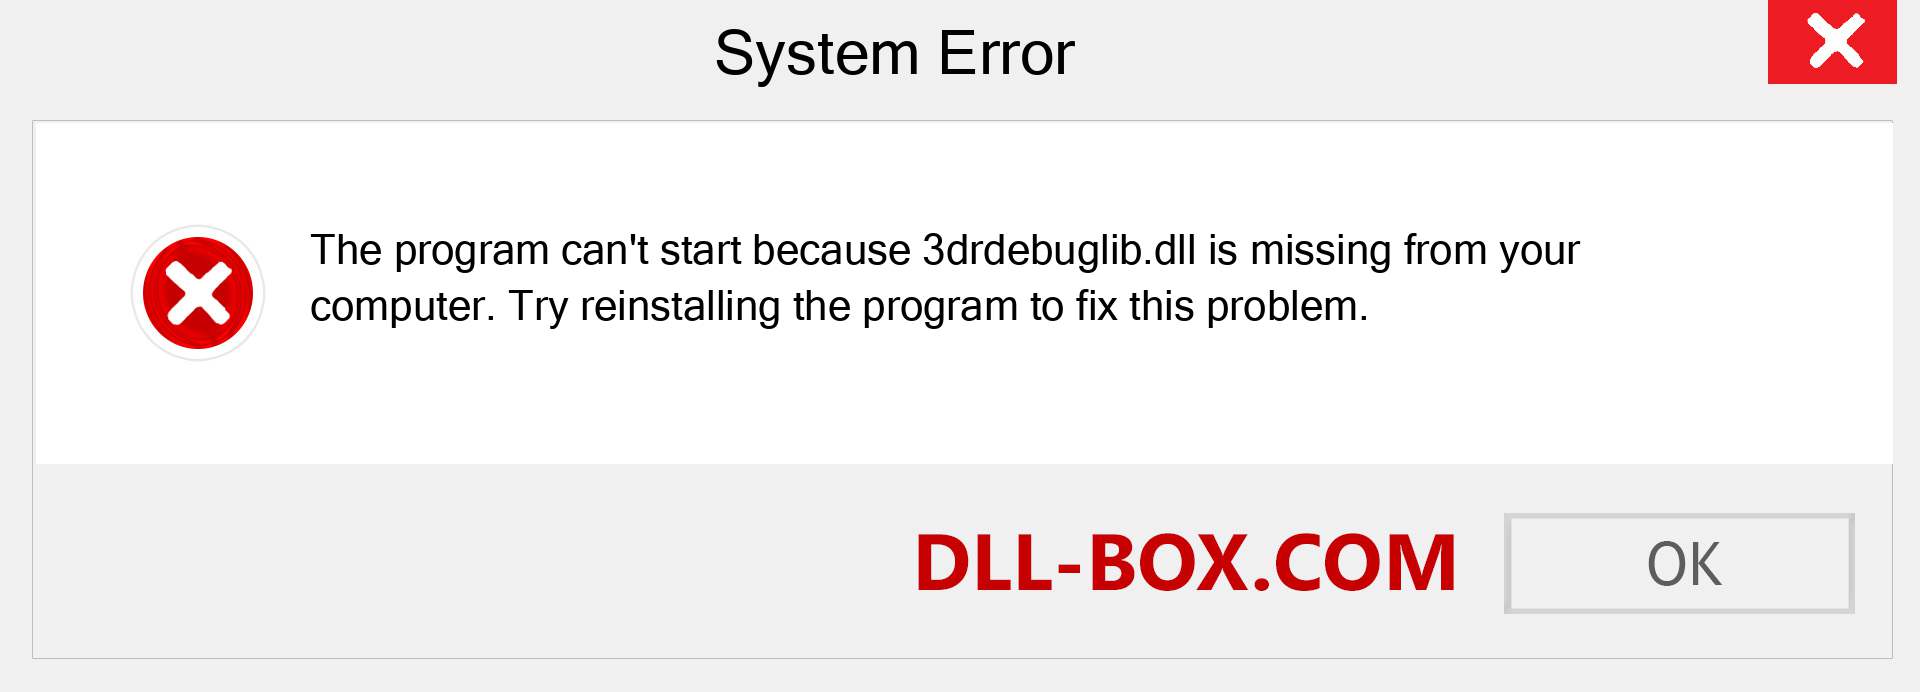  3drdebuglib.dll file is missing?. Download for Windows 7, 8, 10 - Fix  3drdebuglib dll Missing Error on Windows, photos, images